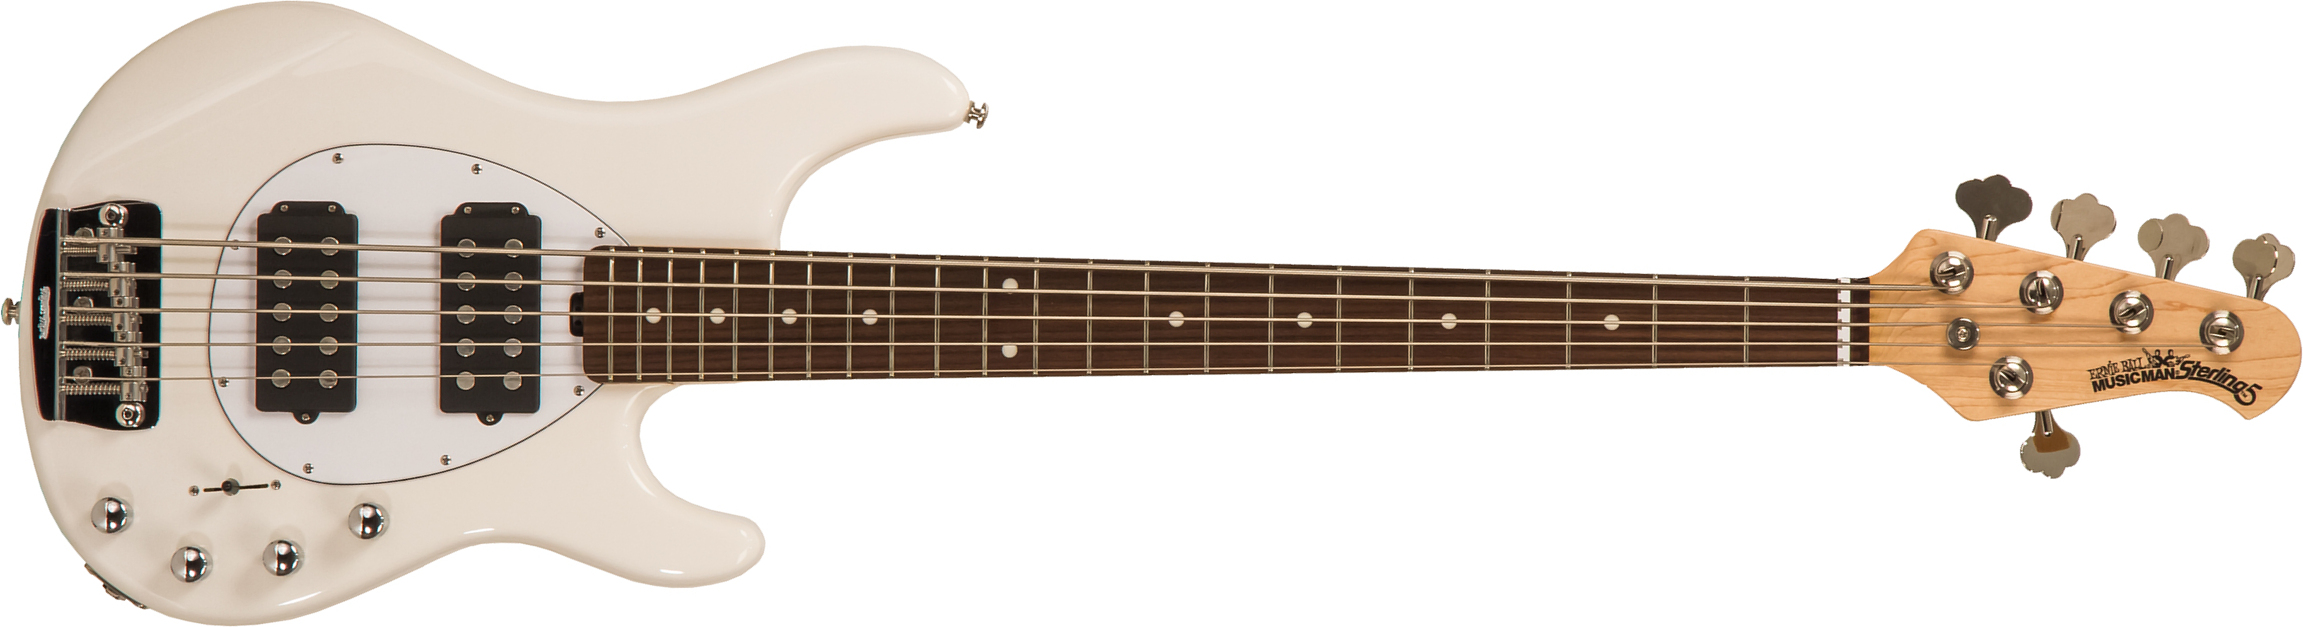 Music Man Sterling 5 2h 5c Active Rw - White - Solid body electric bass - Main picture